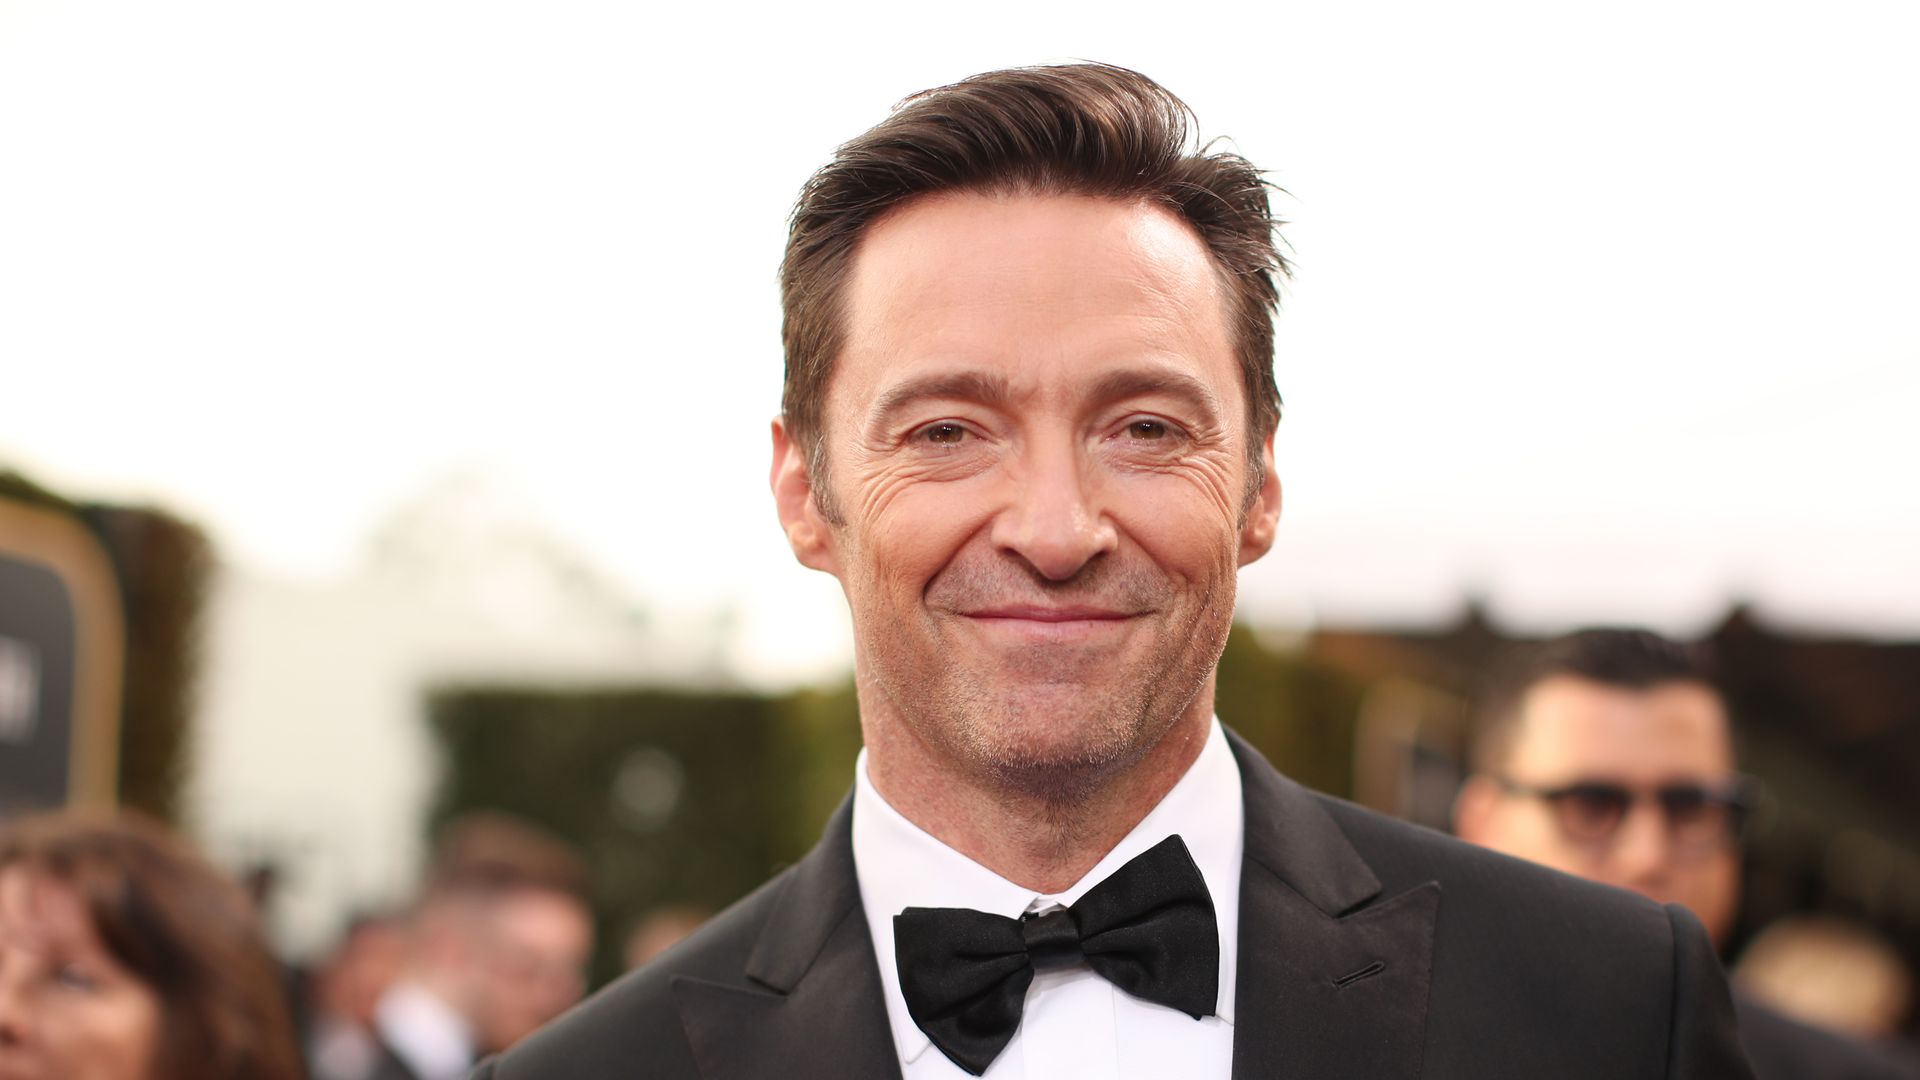 75th ANNUAL GOLDEN GLOBE AWARDS -- Pictured: Actor Hugh Jackman arrives to the 75th Annual Golden Globe Awards held at the Beverly Hilton Hotel on January 7, 2018.